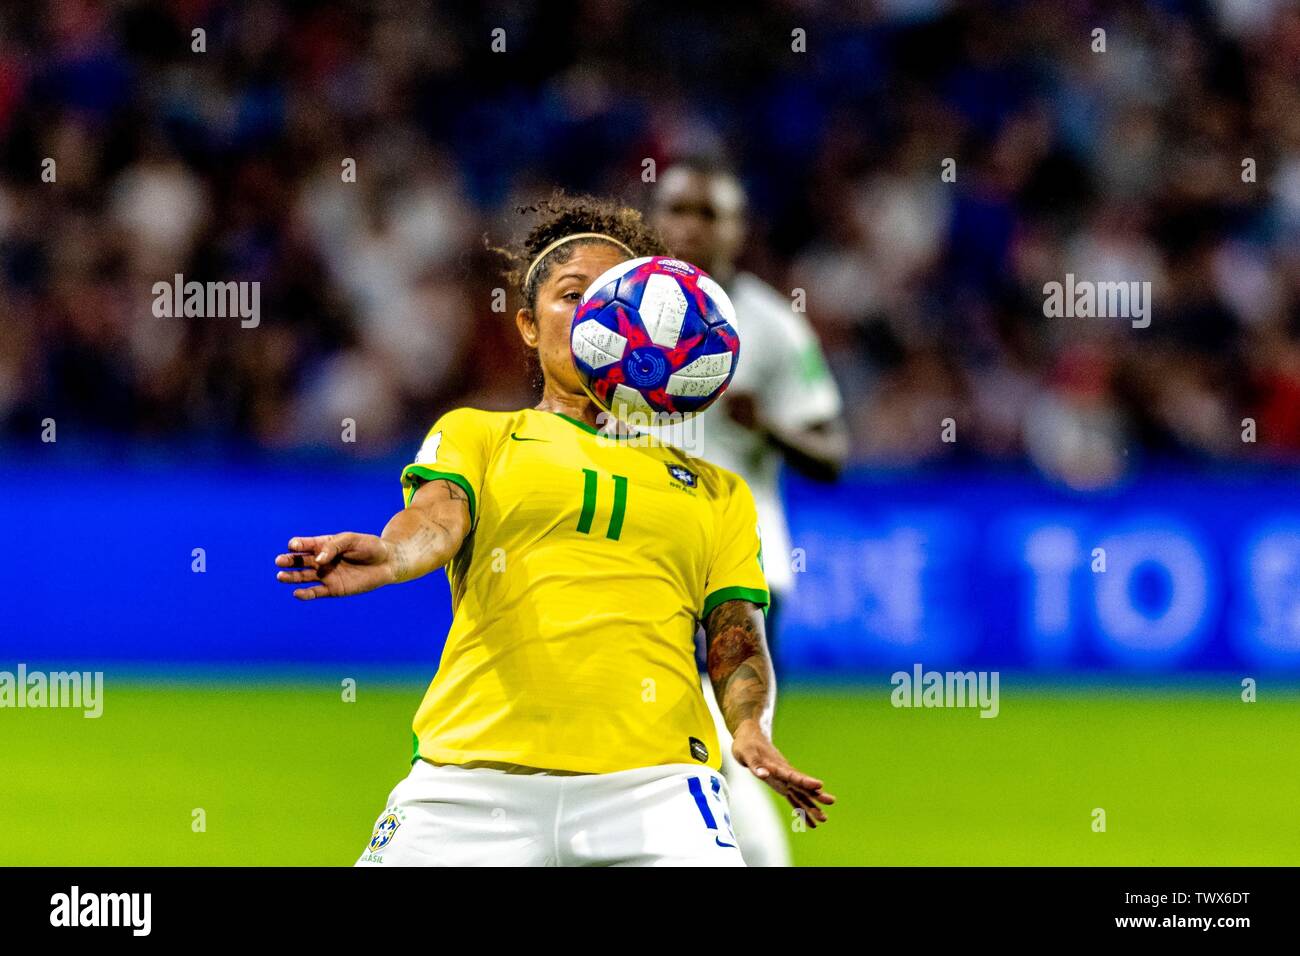 Le Havre, France. 23rd June, 2019. FRANCE V BRAZIL - Cristiane from Brazil during a match between Brazil and France. World Cup Qualification Football. FIFA. Held at the Oceane Stadium in Le Havre, France. (Photo: Richard Callis/Fotoarena) Credit: Foto Arena LTDA/Alamy Live News Stock Photo